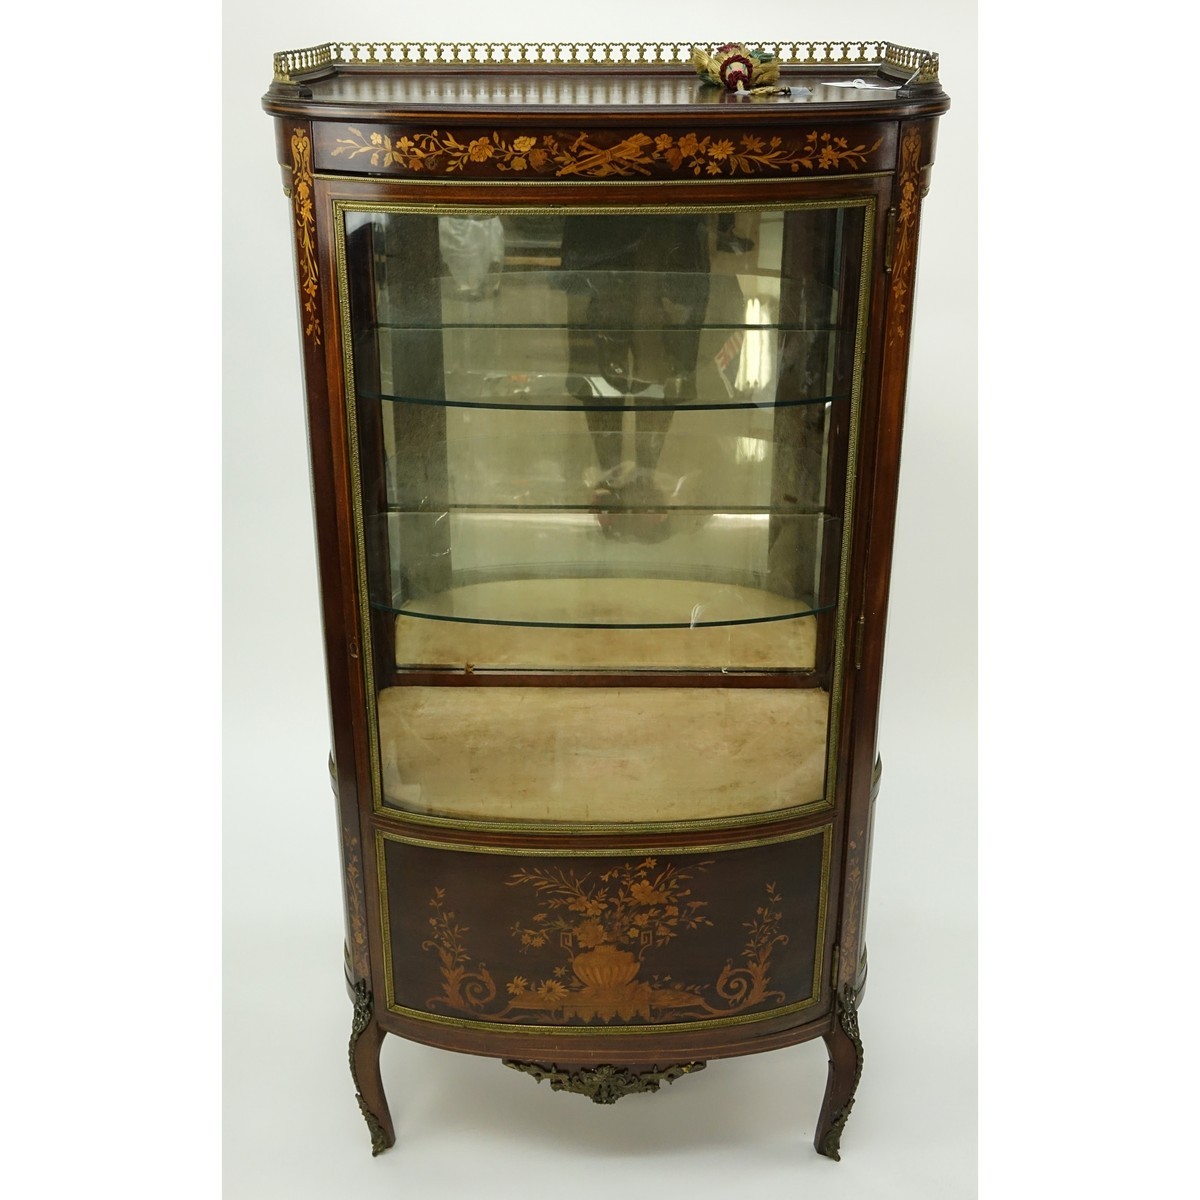 Tall Mid Century French Louis XVI Style Inlaid, Gilt Brass Mounted Vitrine. Floral inlay throughput the panel and top apron, gallery, stands on curved tapering legs, key included.